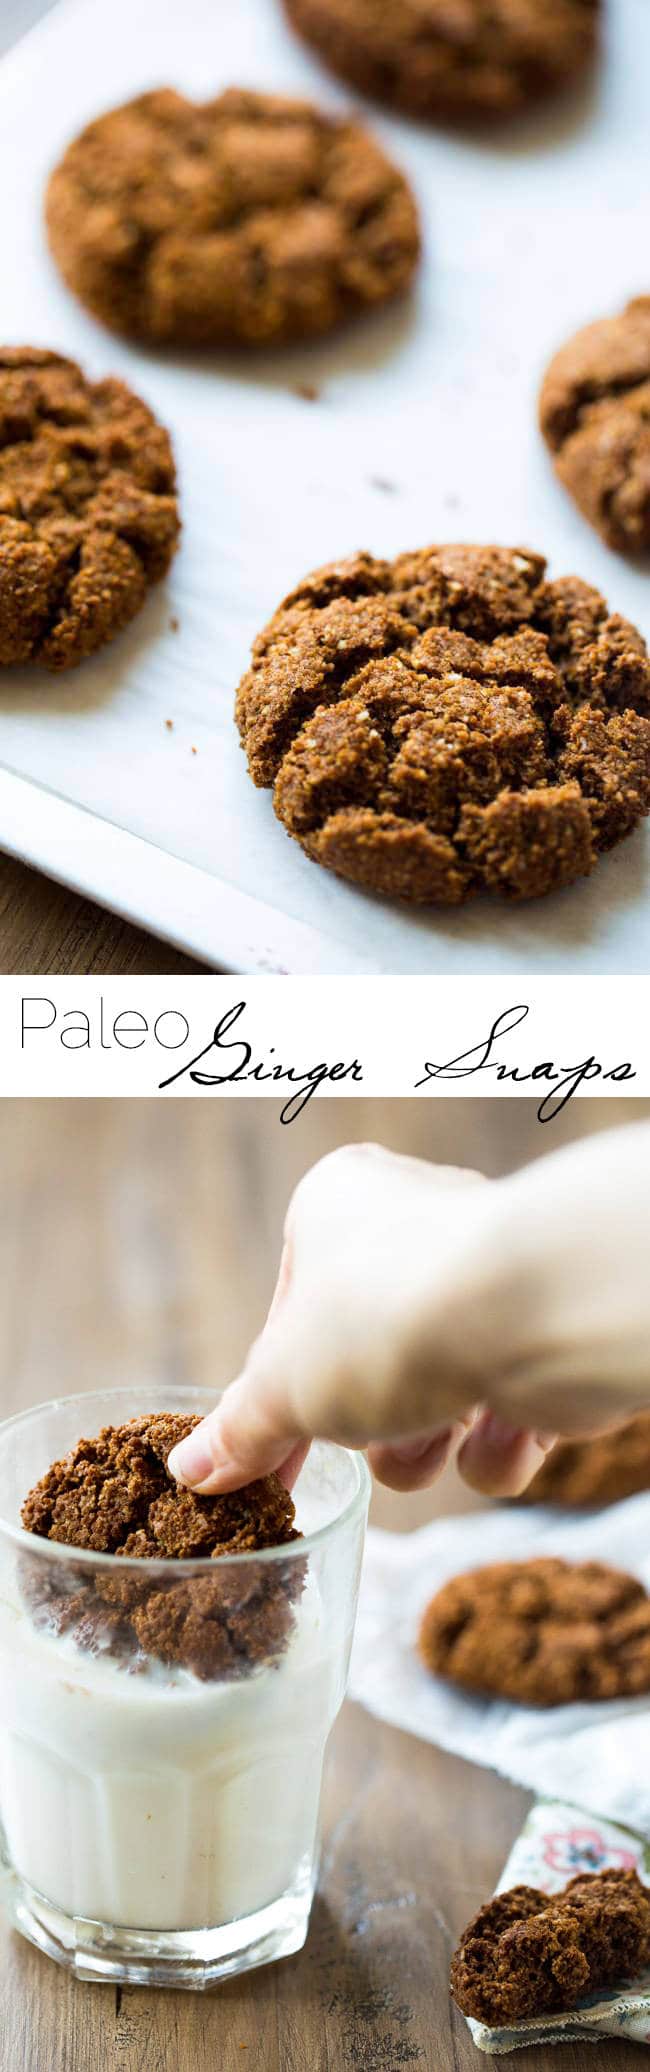 Paleo Gingersnaps - Completely butter free, gluten free and grain free, you will be amazed that these Christmas cookies taste better than Grandmas! Seriously, the best! | Foodfaithfitness.com | @FoodFaithFit